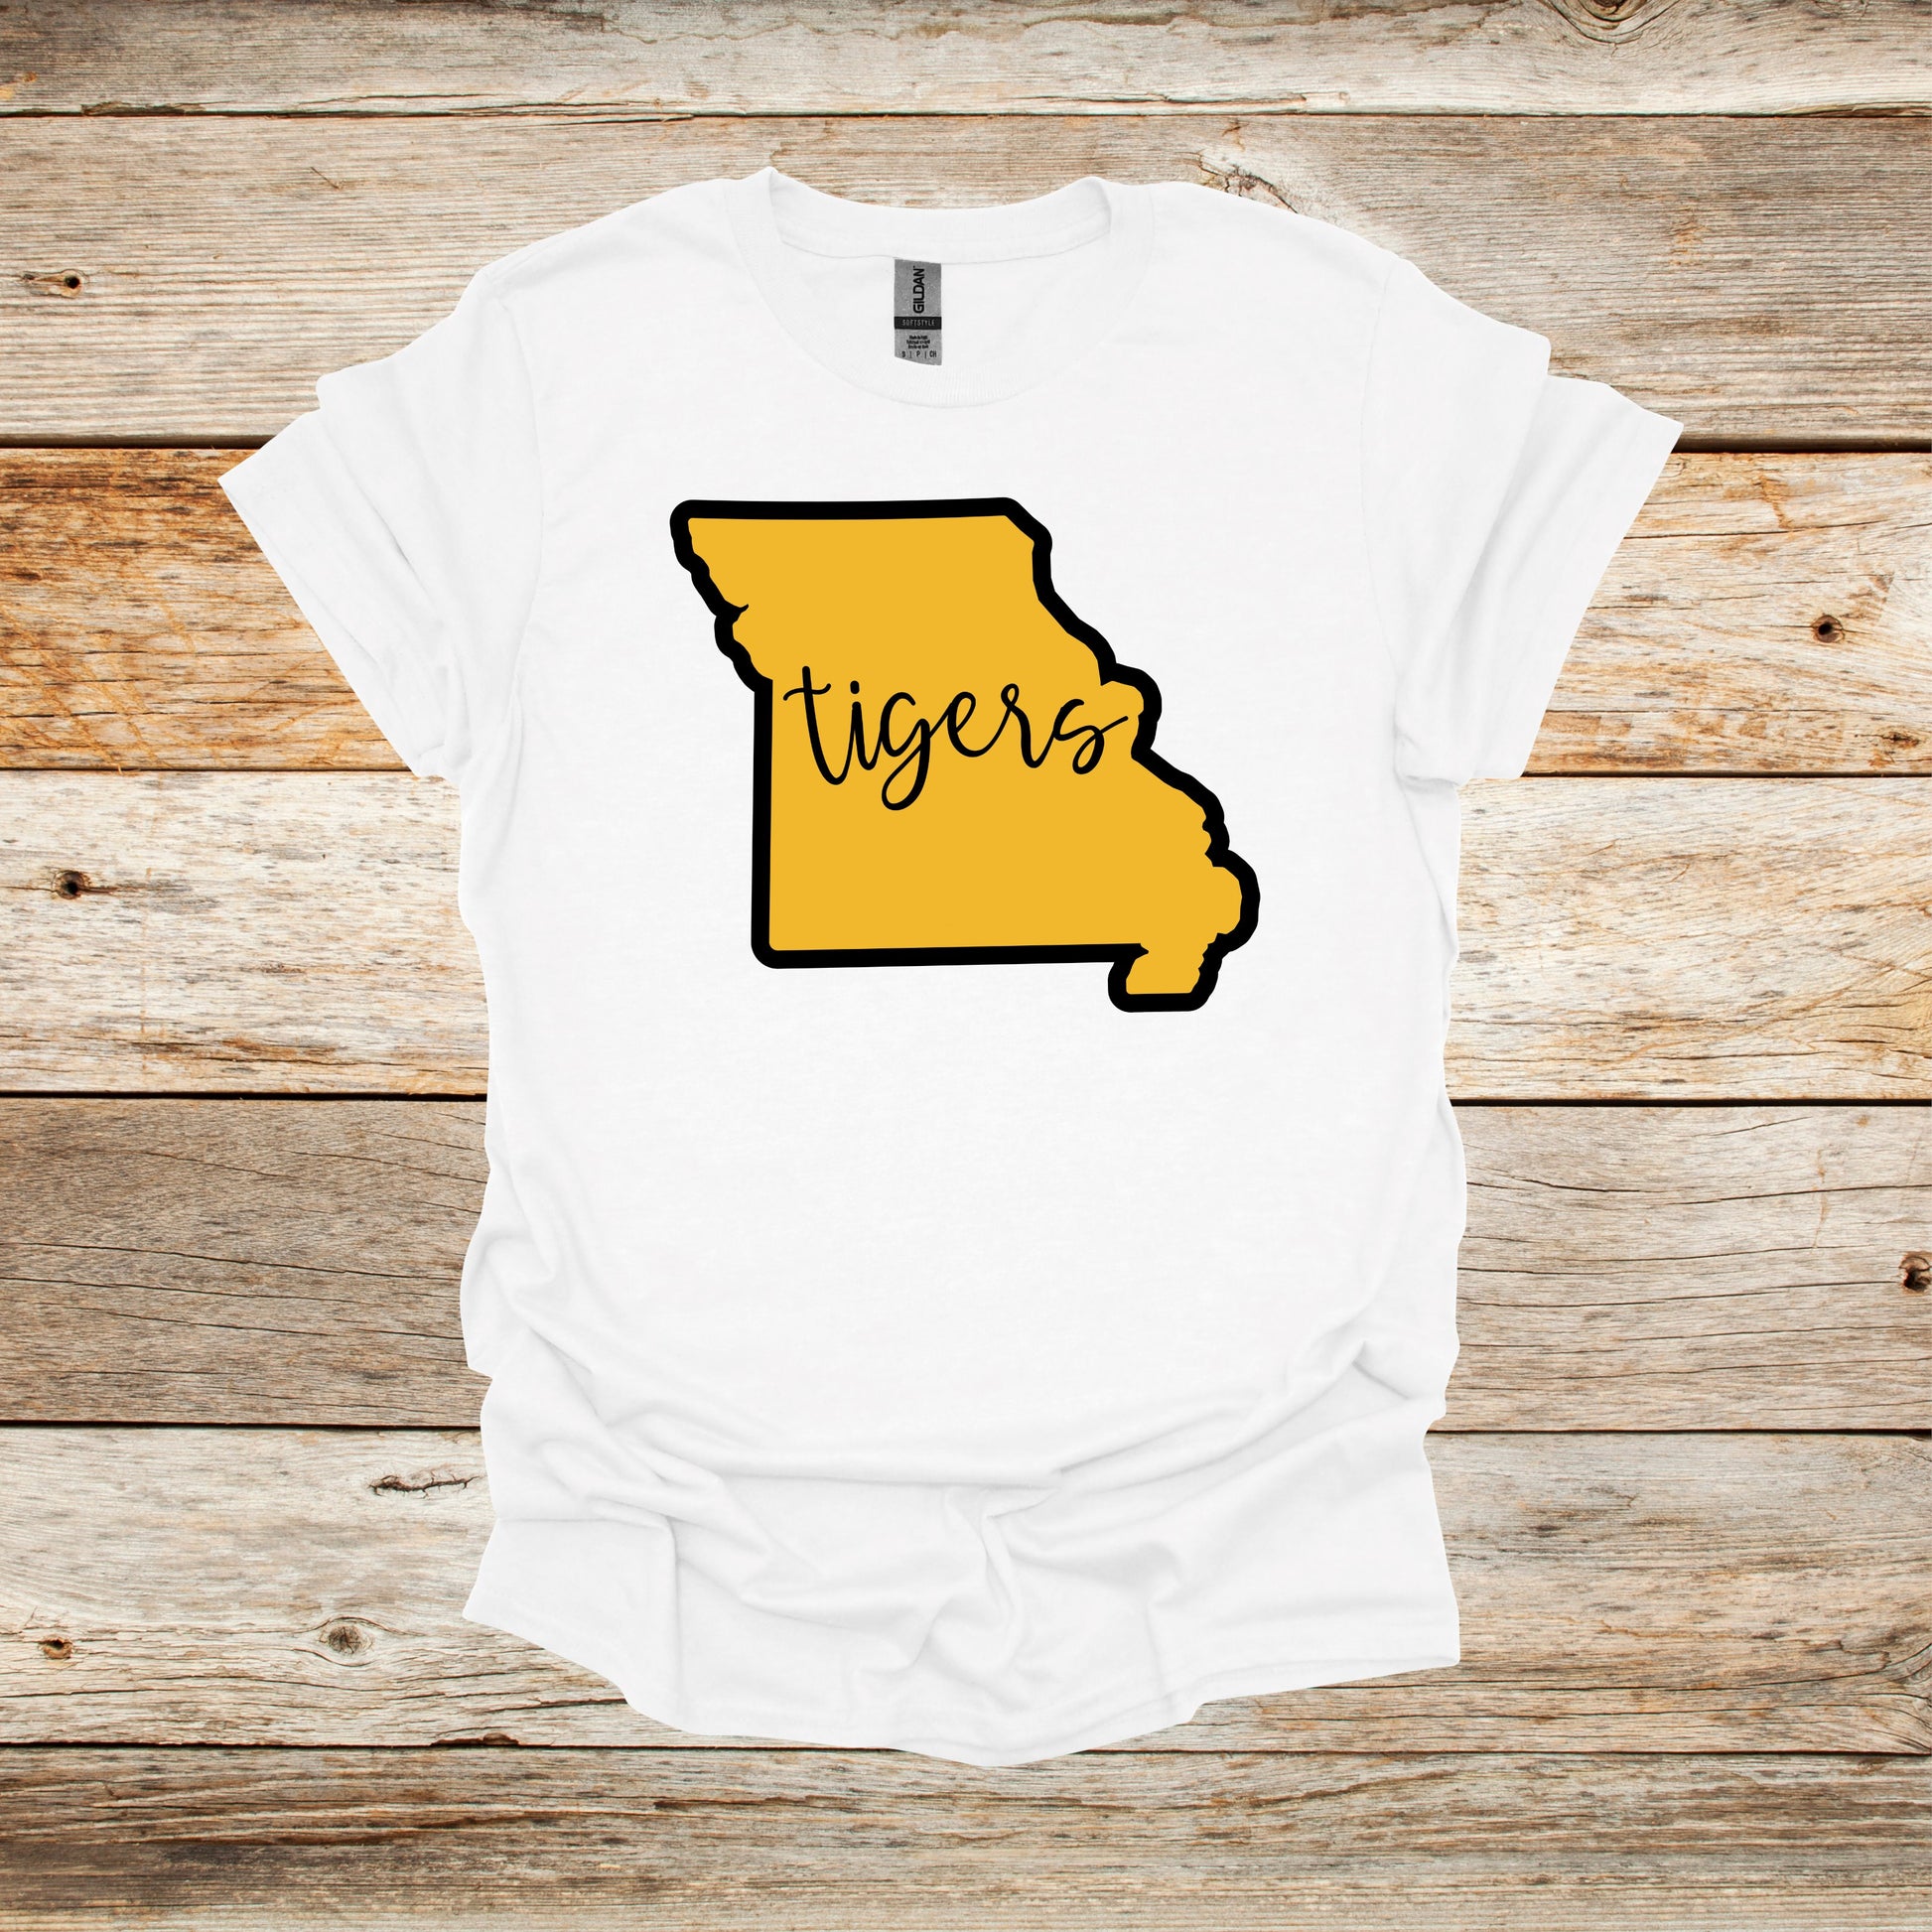 College T Shirt - Missouri Tigers - State Outline - Adult and Children's Tee Shirts T-Shirts Graphic Avenue White Adult Small 